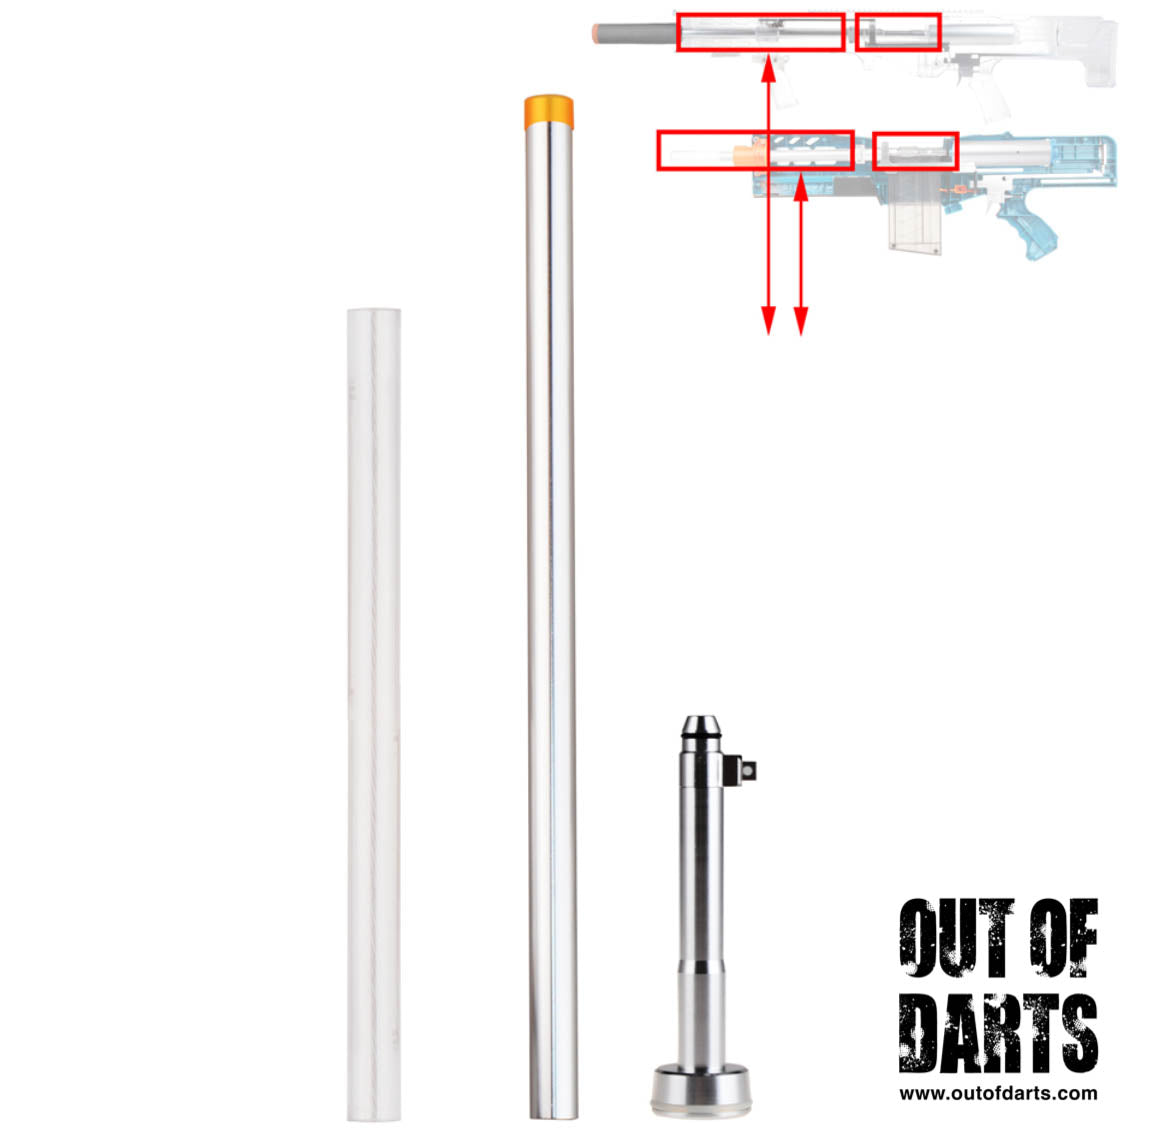 Worker Short Dart Tube Kit for Longshot / Terminator (Two Color Options) CLOSEOUT